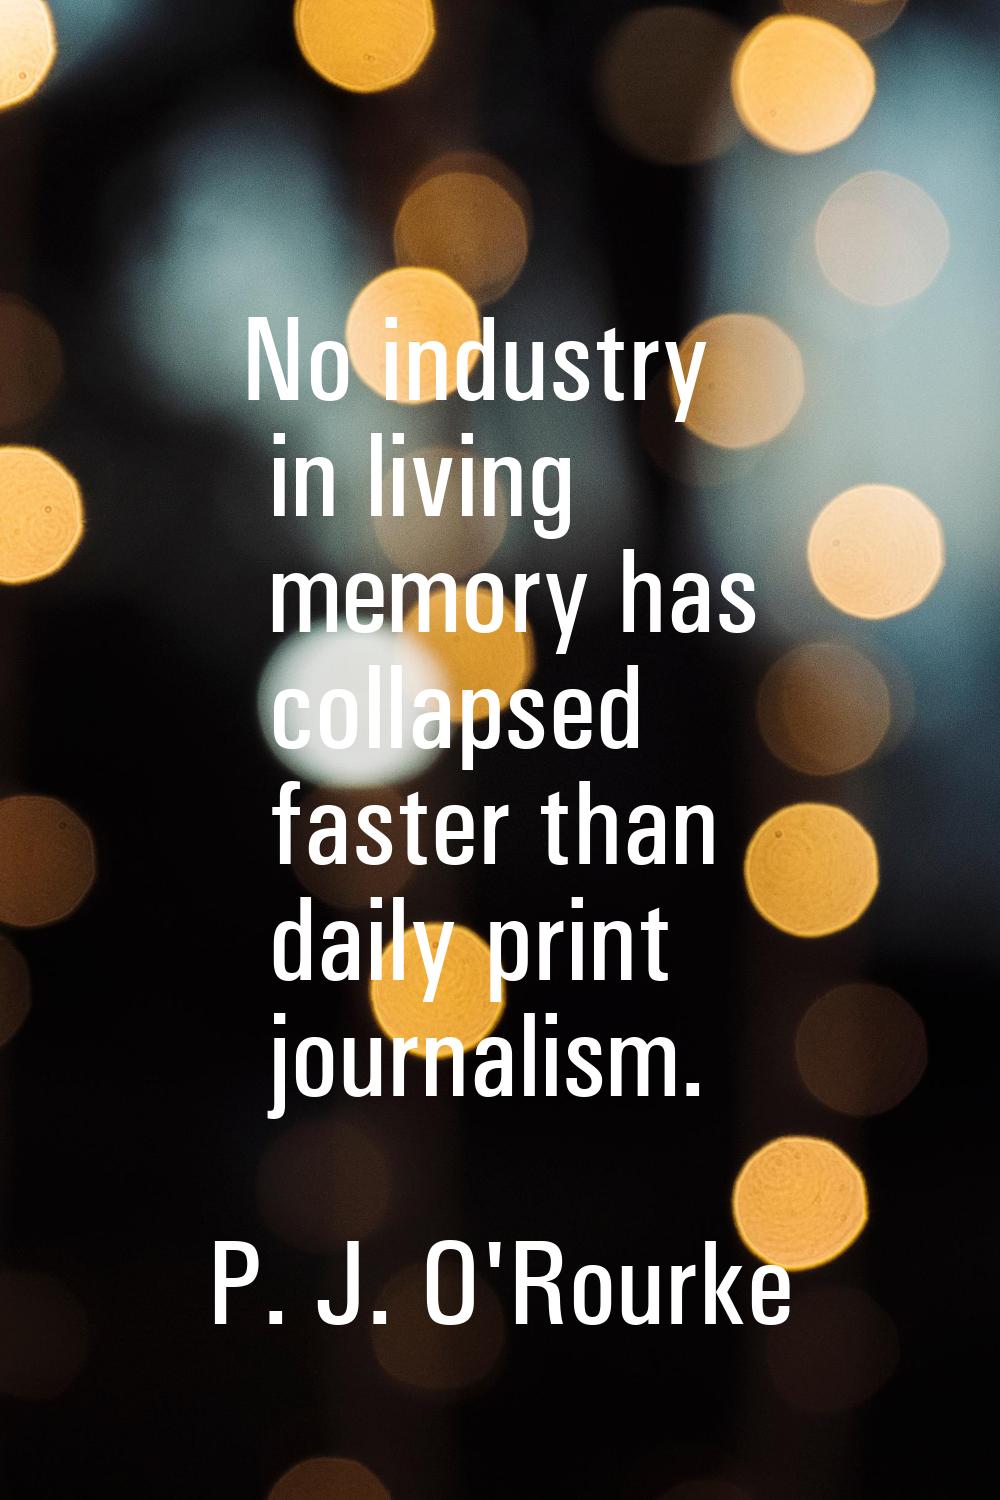 No industry in living memory has collapsed faster than daily print journalism.